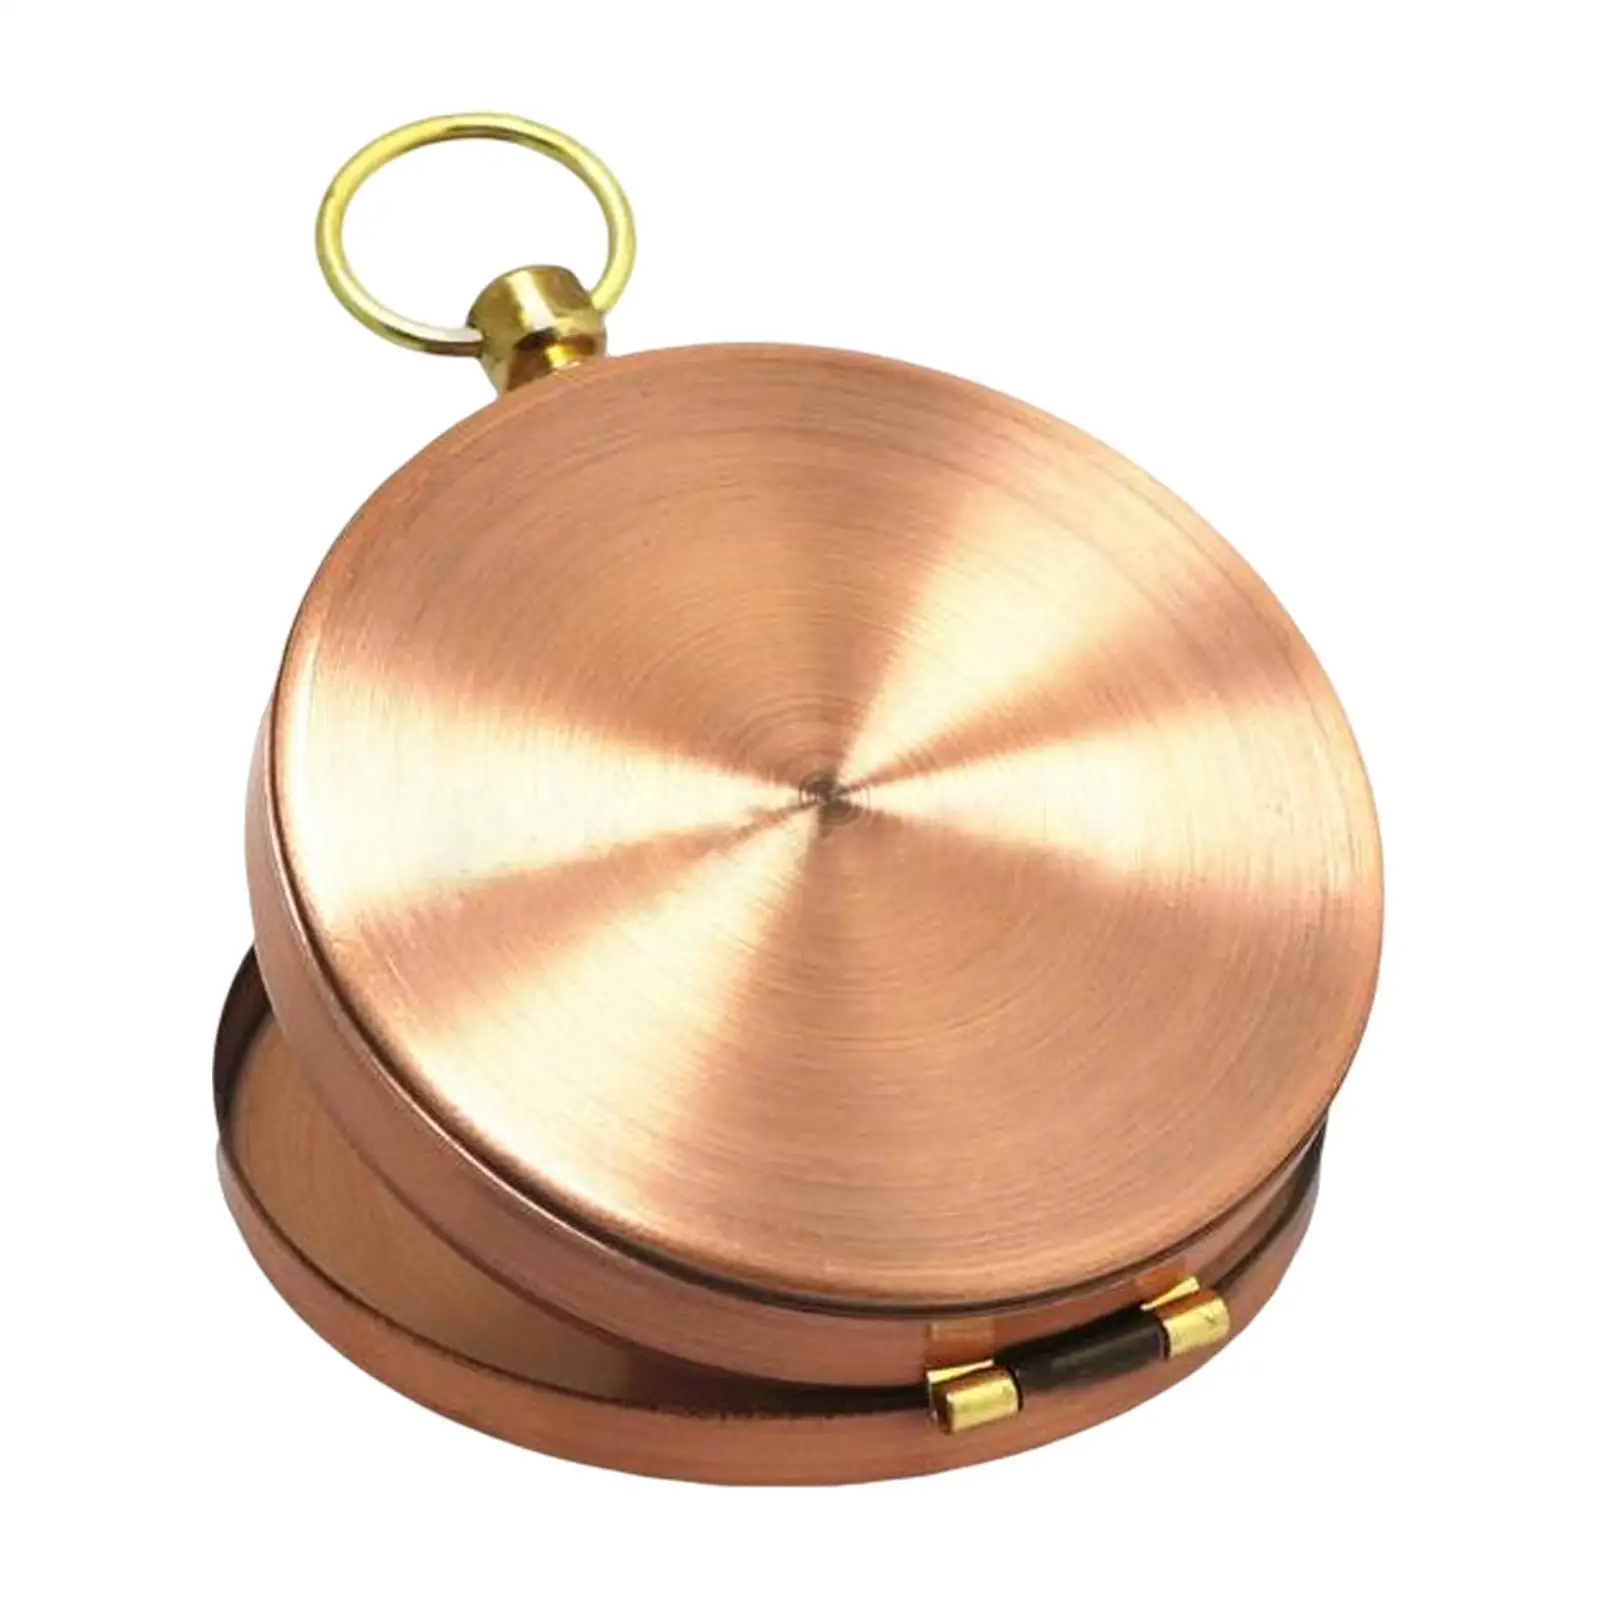 Classic Pocket Copper Compass Portable Clamshell Compass Accurate Handheld for Outdoor Survival Camping Hiking Birthday Gift